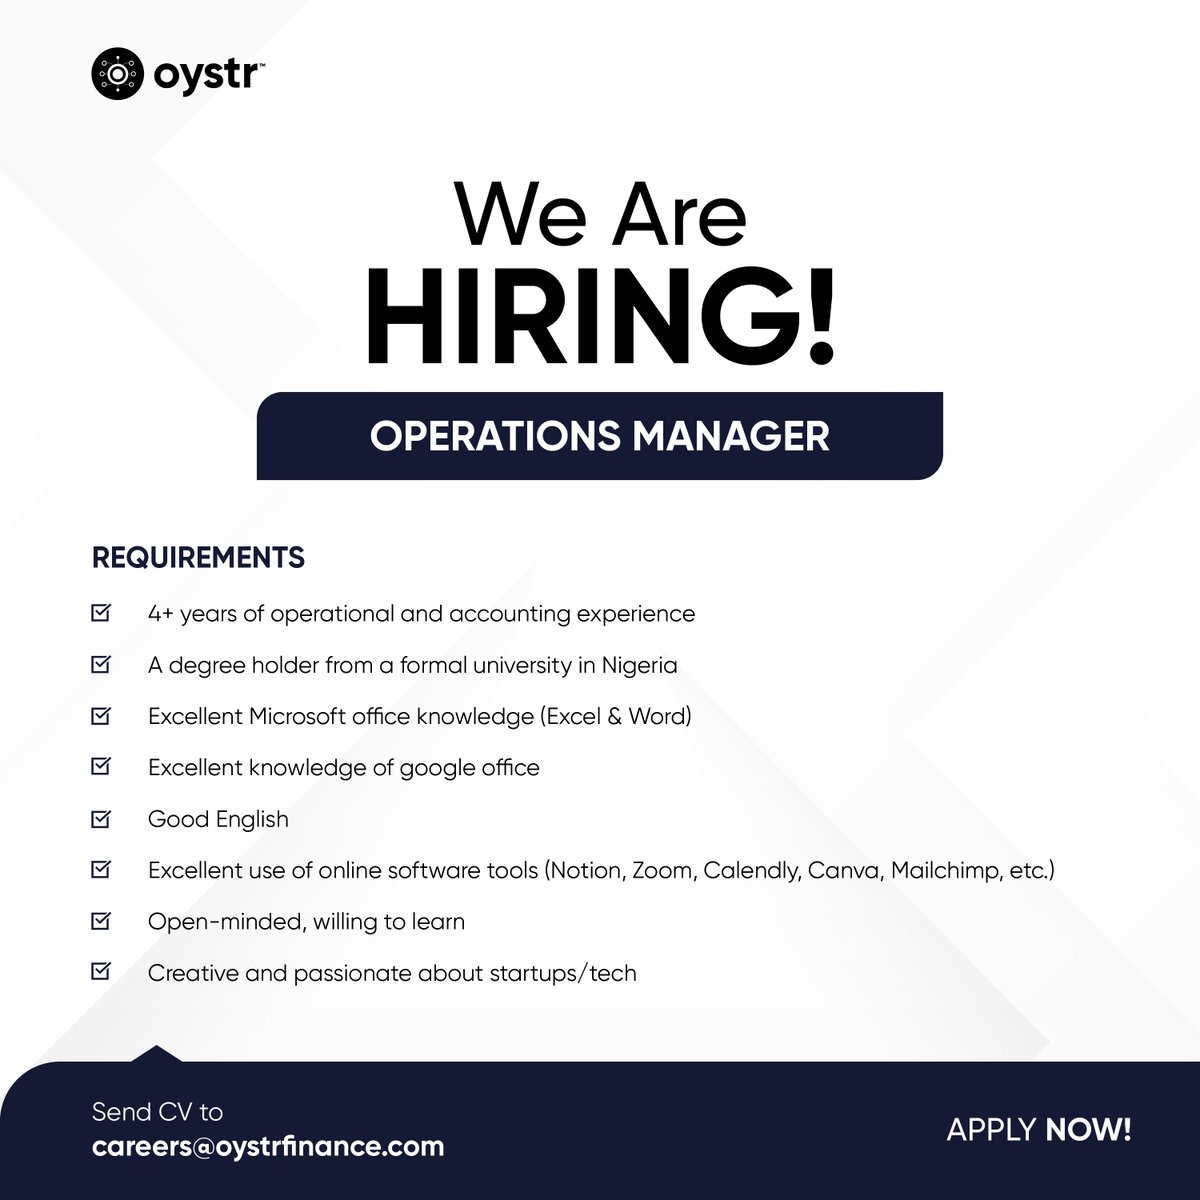 We are Hiring for the role of Operations Manager.

Do you meet our requirements and have the zeal to work in a growth-focused organization? Send your CV to careers@oystrfinance.com and apply today.

#Hiring #OperationsManager #linkedinjobs #Oystr